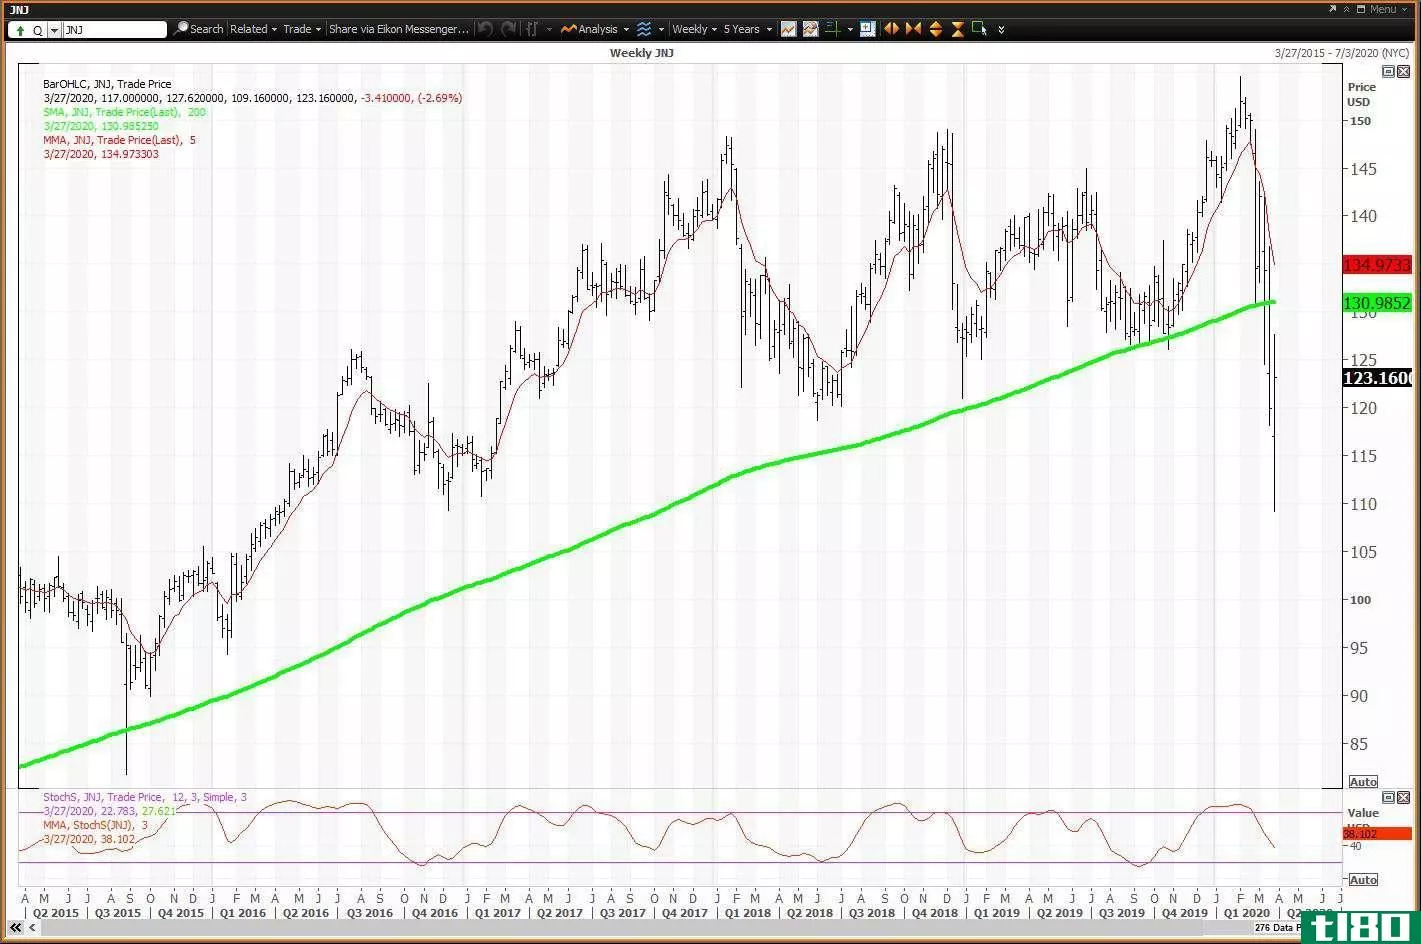 Weekly chart showing the share price performance of Johnson & Johnson (JNJ)